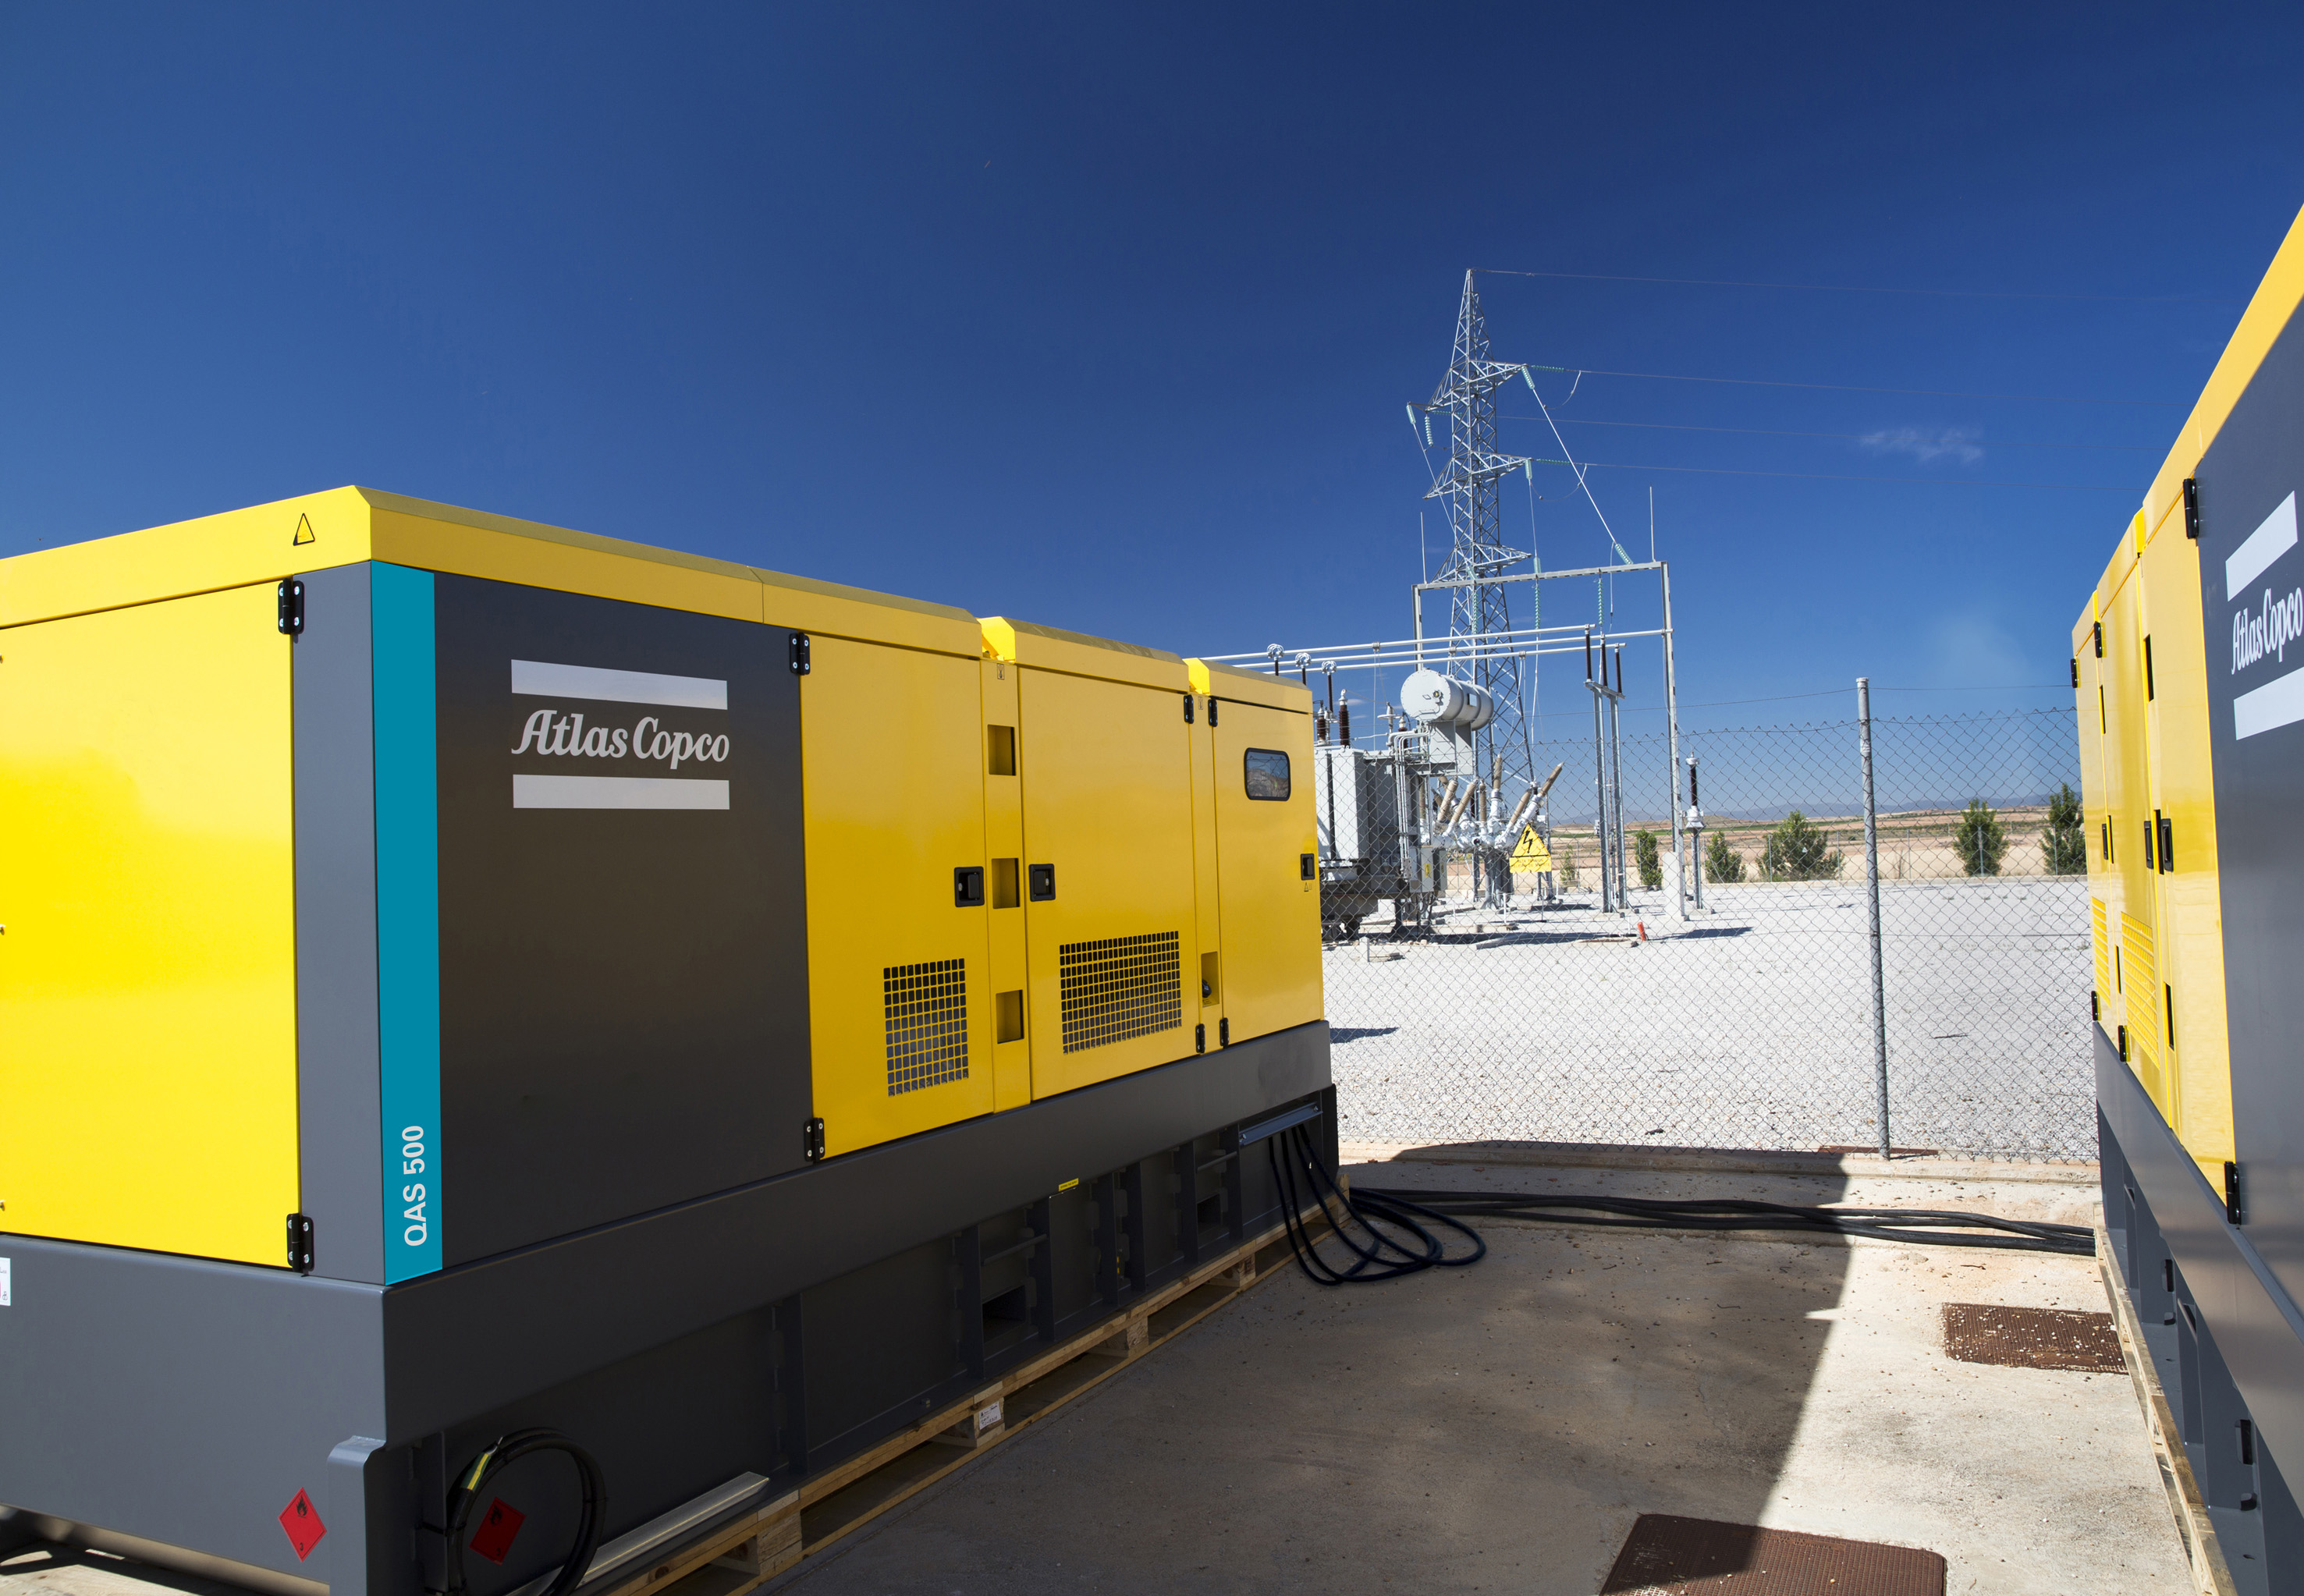 Even if starting off with just one unit, it’s worth asking the equipment manufacturer what steps can be taken to parallel a single generator with others to form a modular power plant set up.